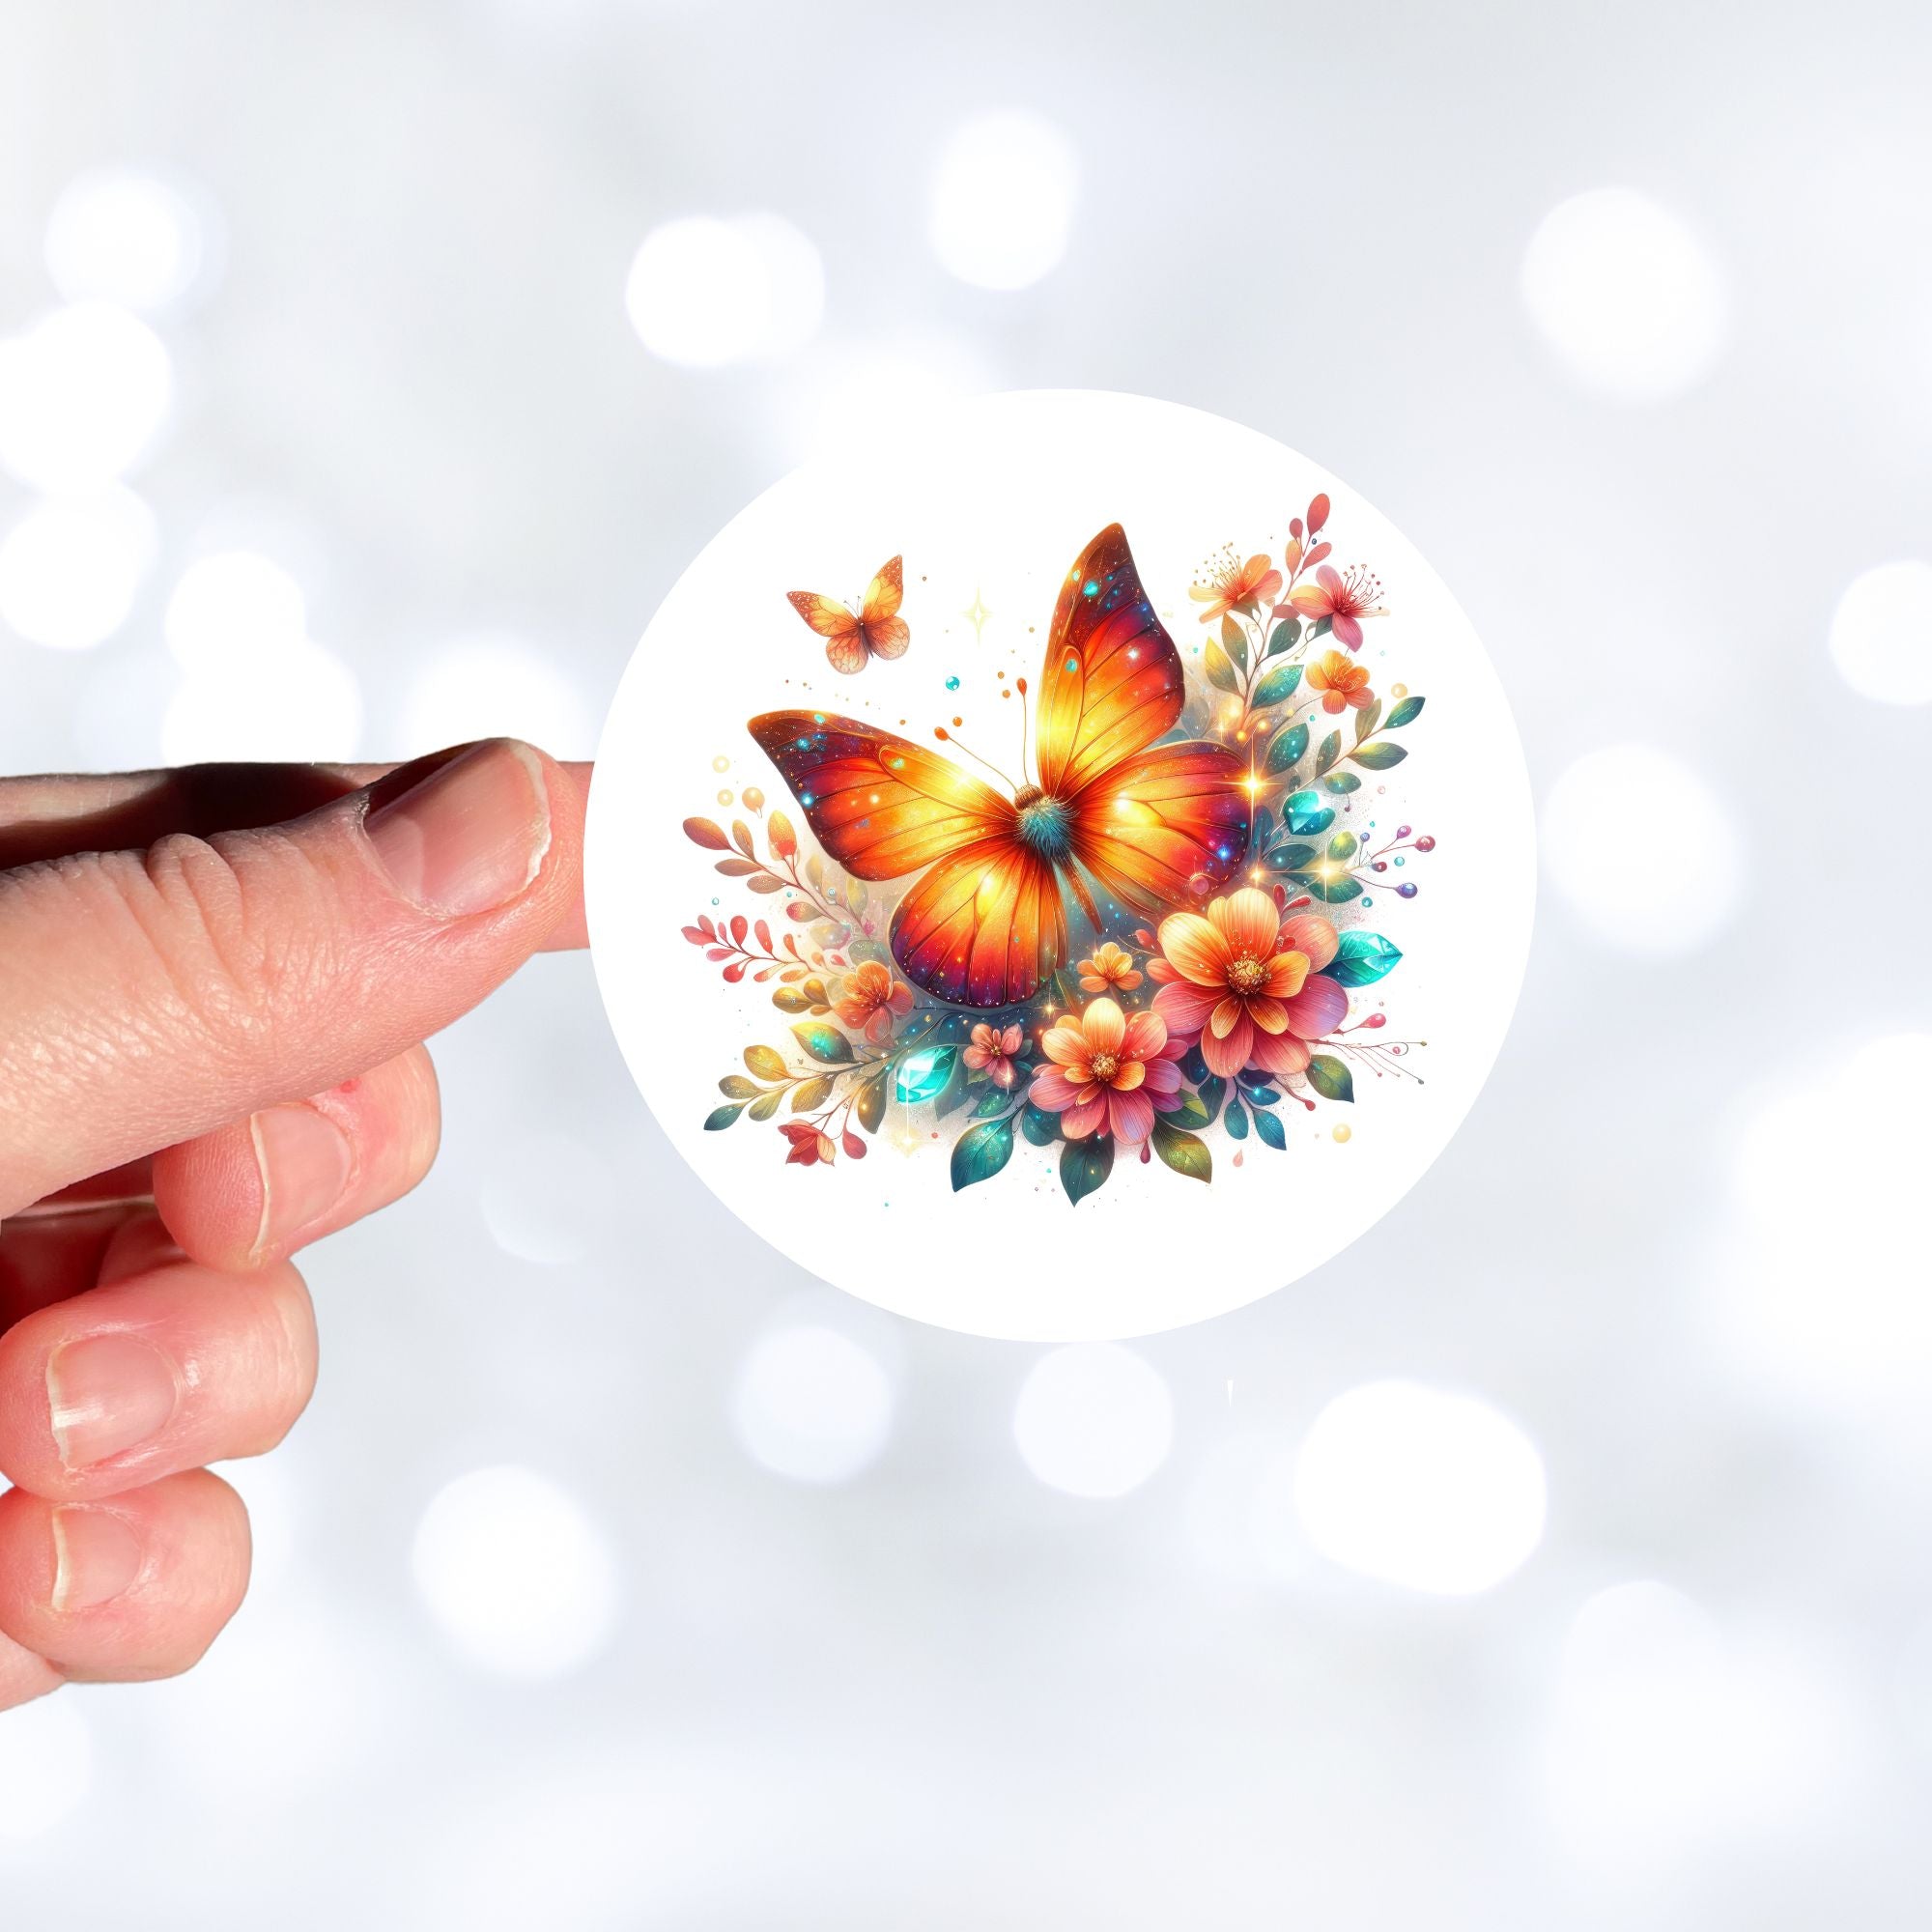 This image shows a hand holding the Orange Butterfly with Stars Die-Cut Sticker.